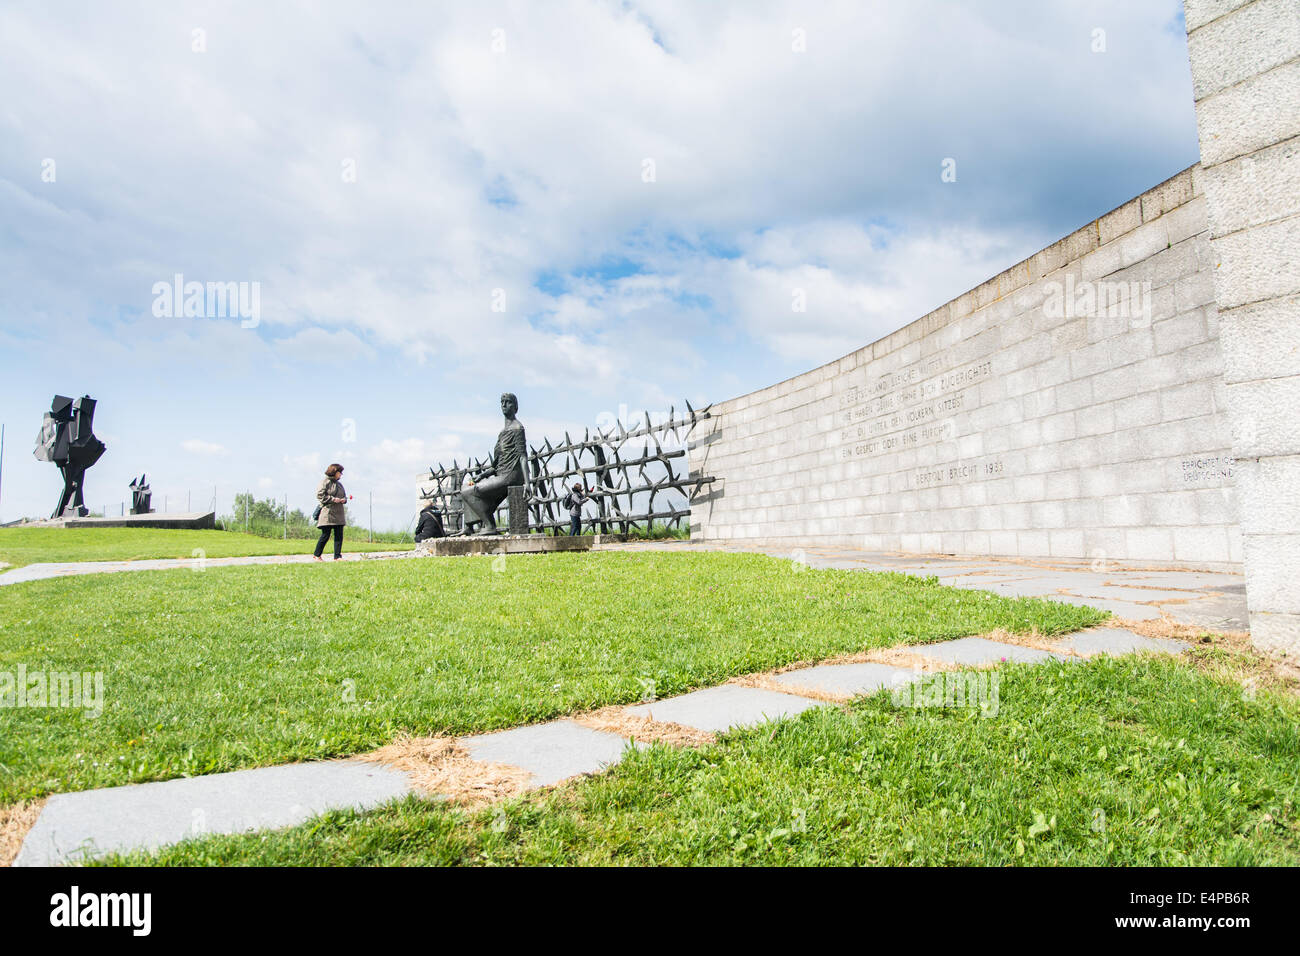 Mauthausen,Austria-May 10,2014:people admire one of the more monument before entering the camp during a cloudy day Stock Photo